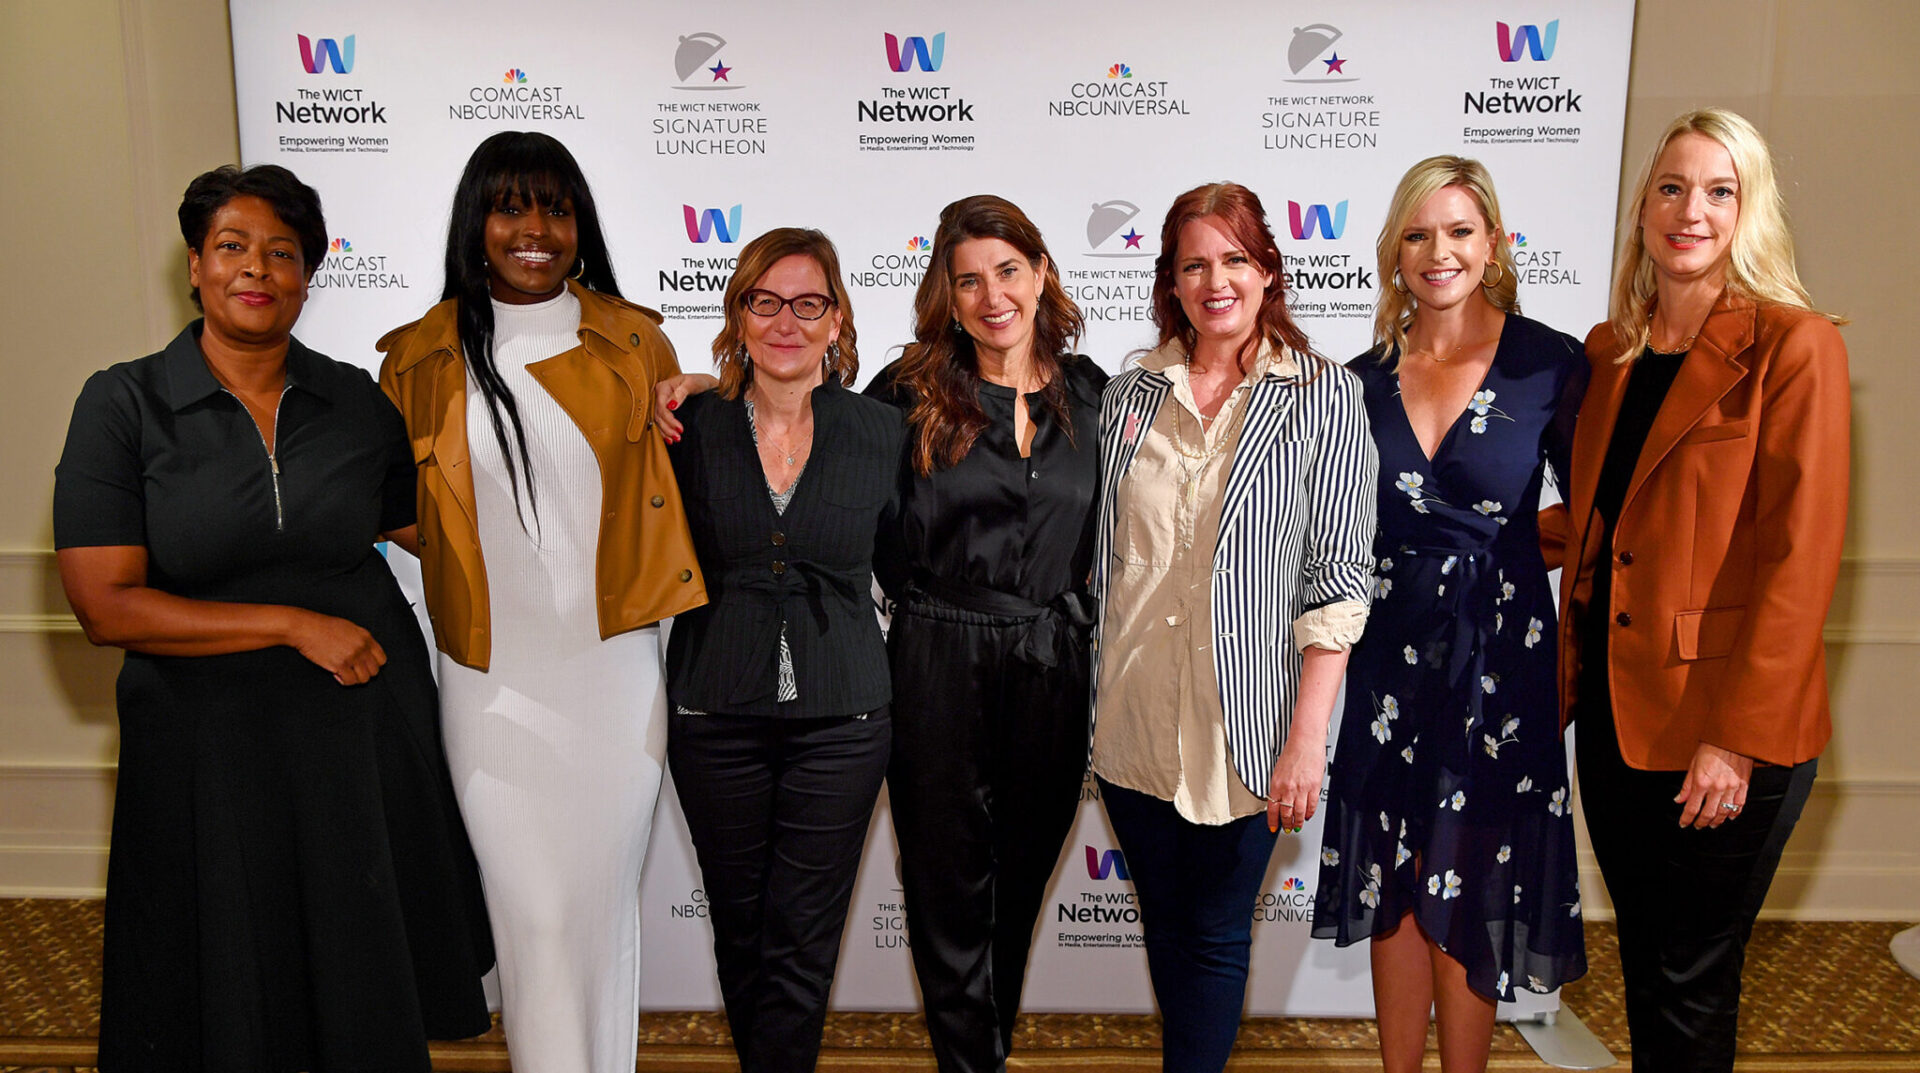 NEW YORK, NEW YORK - APRIL 14: (L-R) Dawn Porter, Aja Evans, Nicole Newnham, Laura Gentile, Allison Glock, Kathryn Tappen, and Jen Neal attend The WICT Network Signature Luncheon at The Plaza on April 14, 2022 in New York City. (Photo by L. Busacca/Getty Images for The WICT Network)